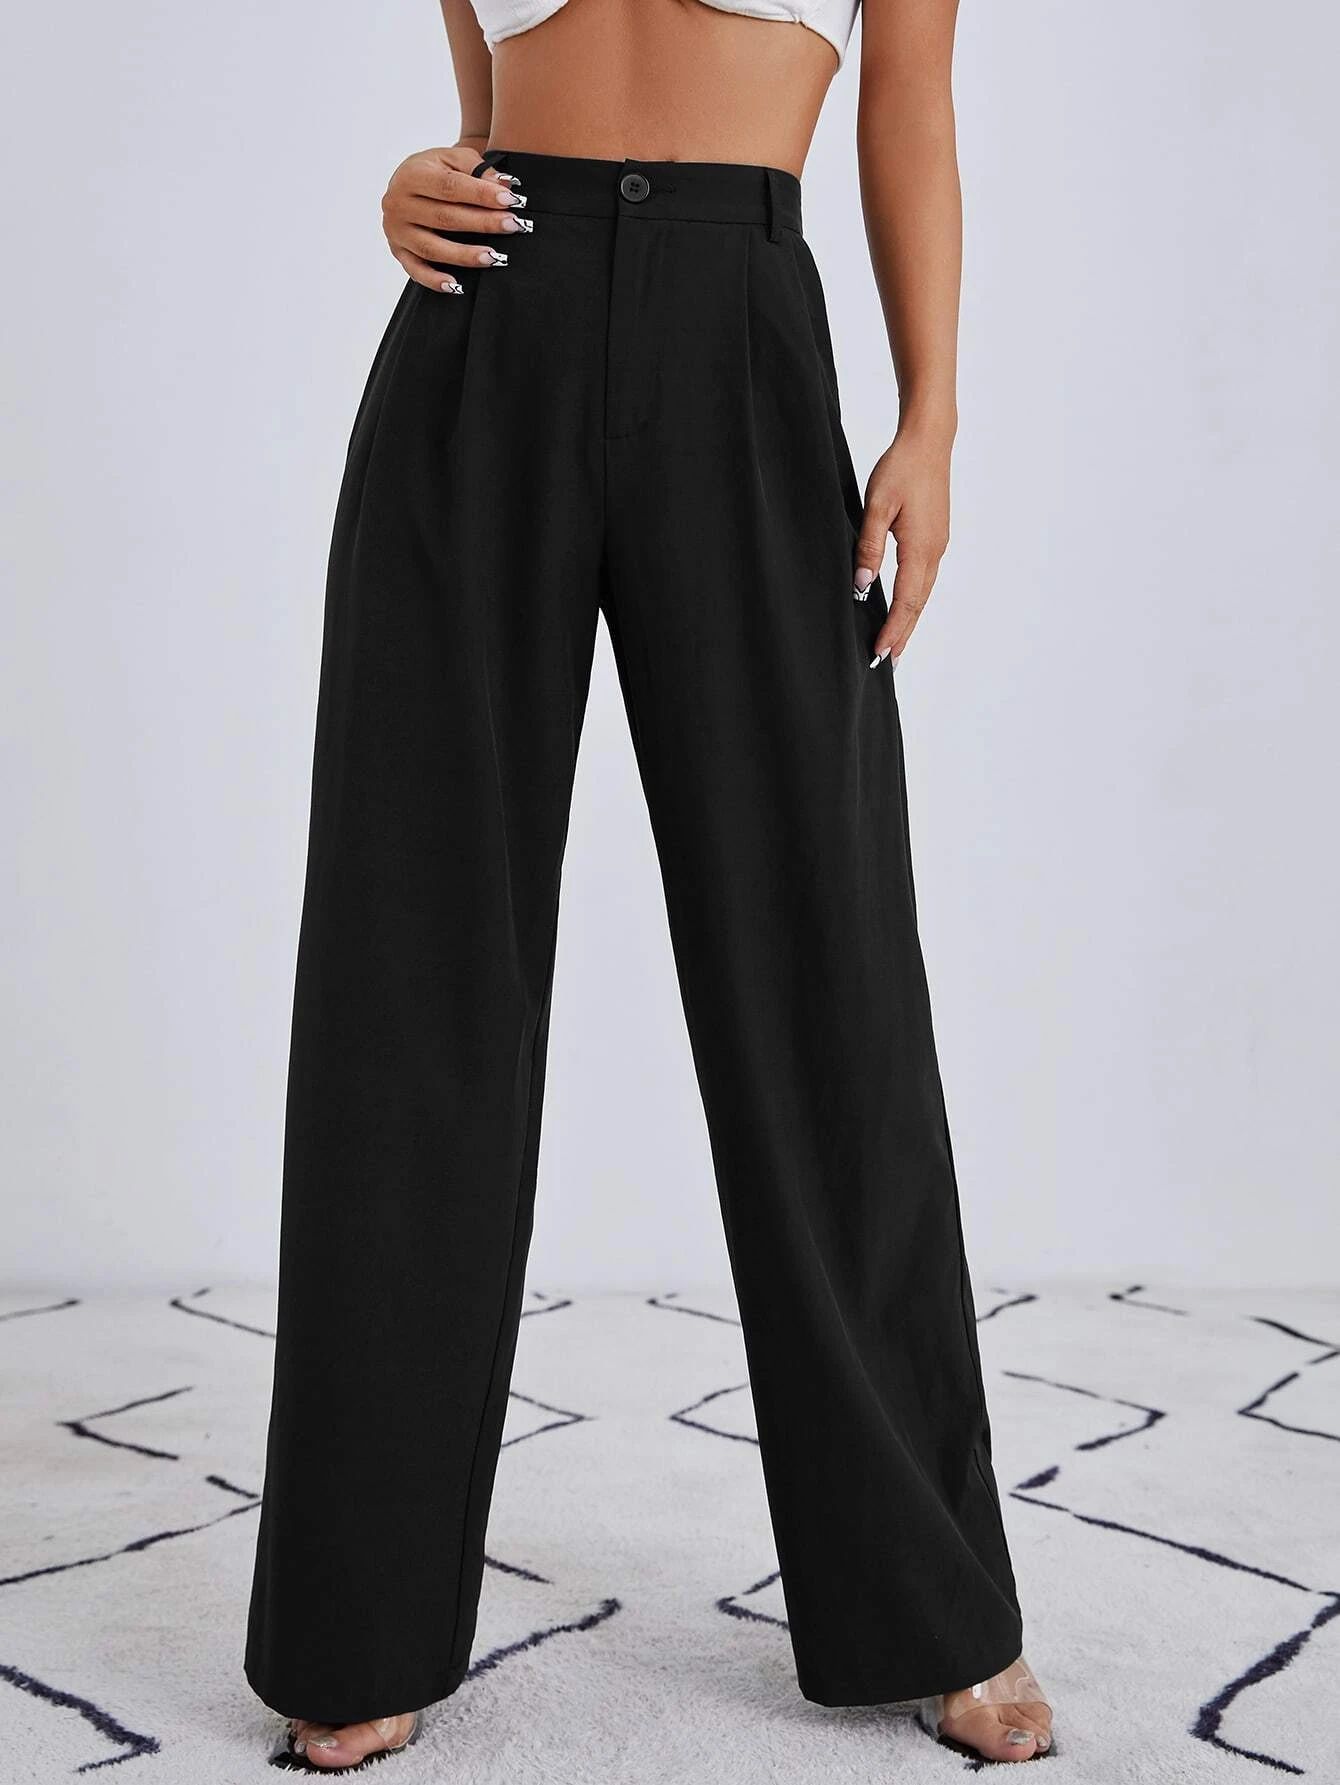 SHEIN Unity Solid Zip Up Straight Leg Pants | SHEIN